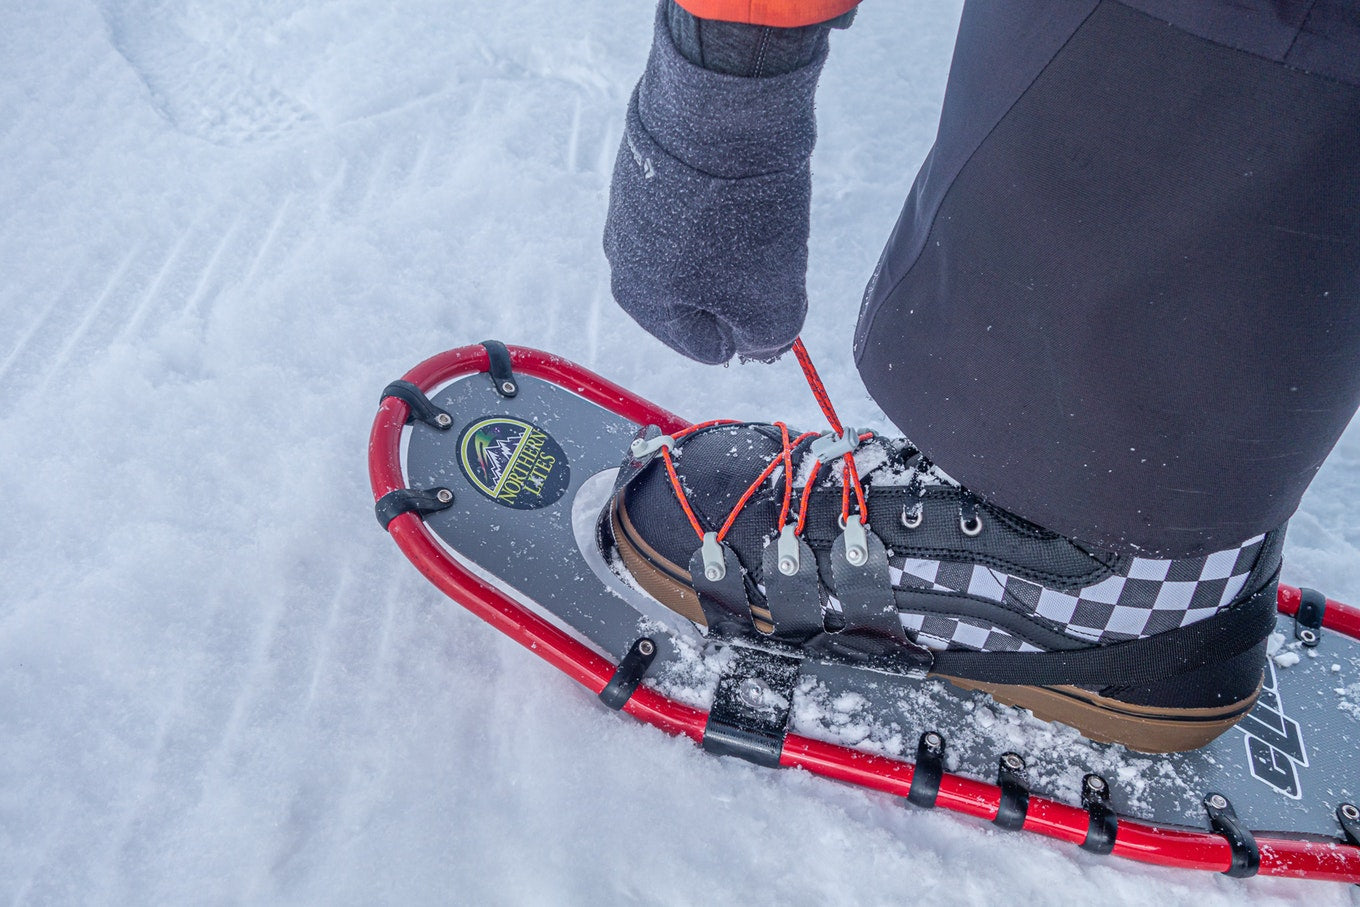 Snowshoe Bindings: Everything You Need to Know